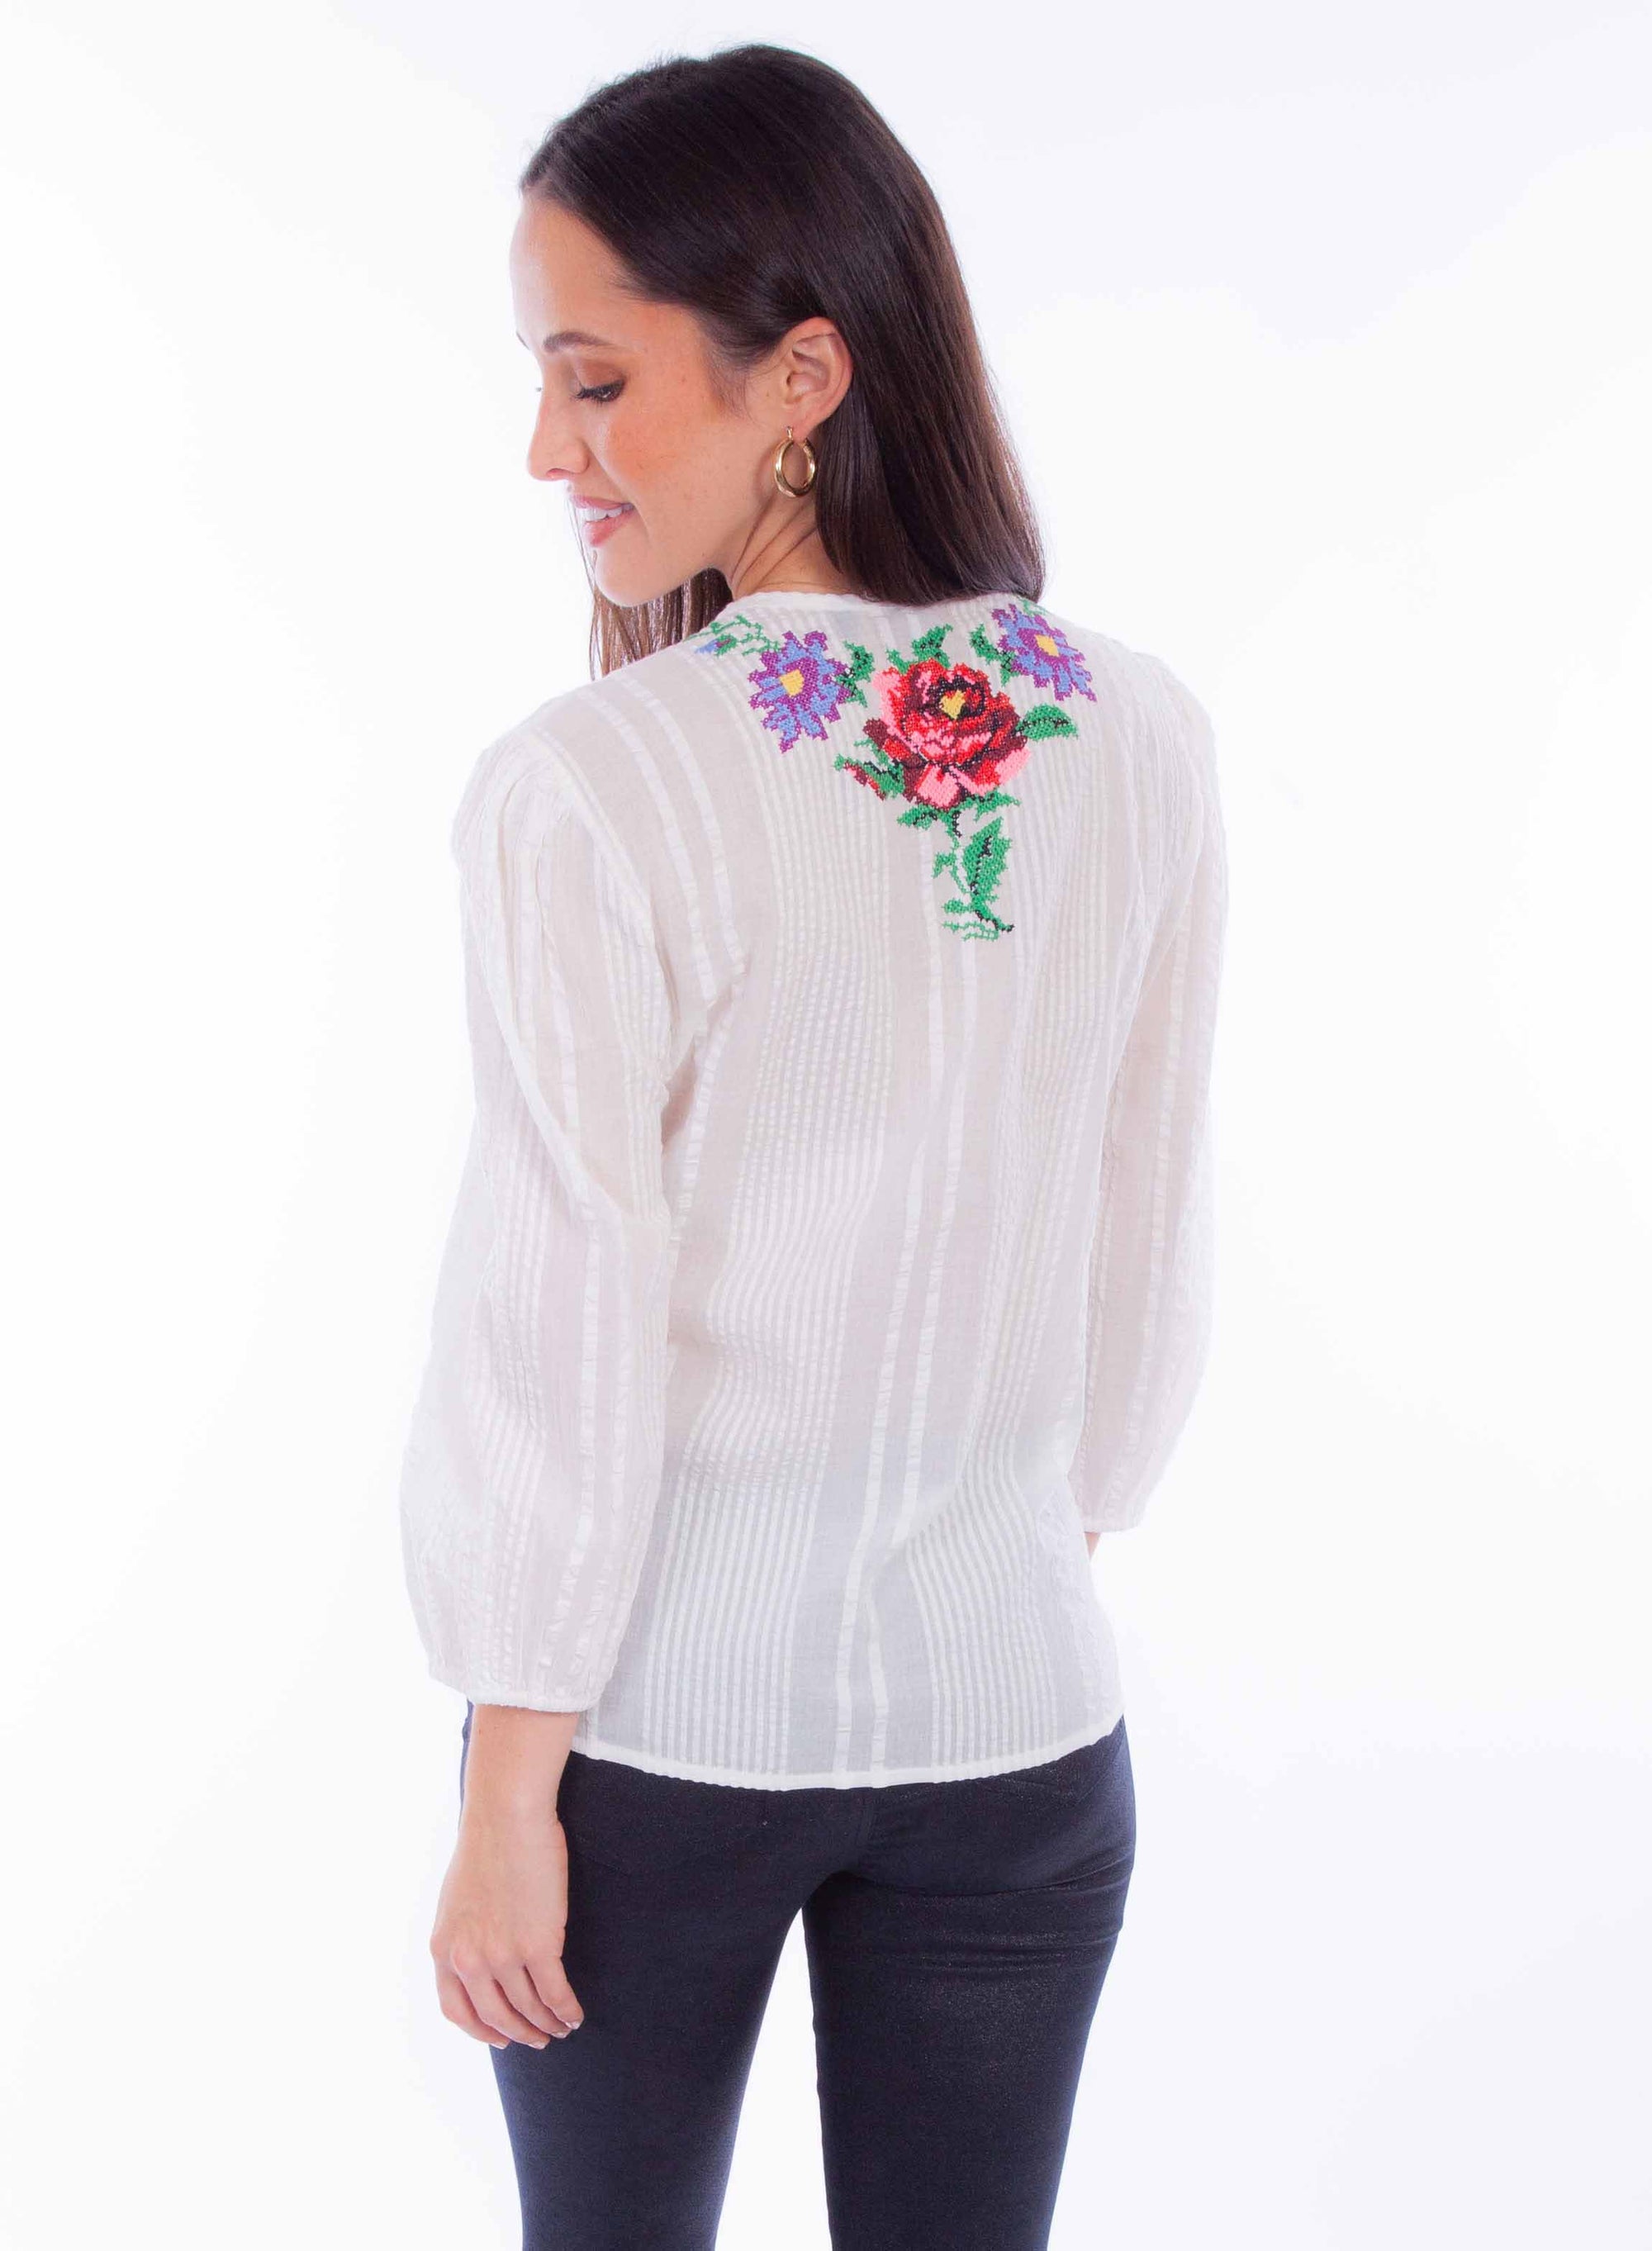 Mariachi Mama Floral Embroidered Top